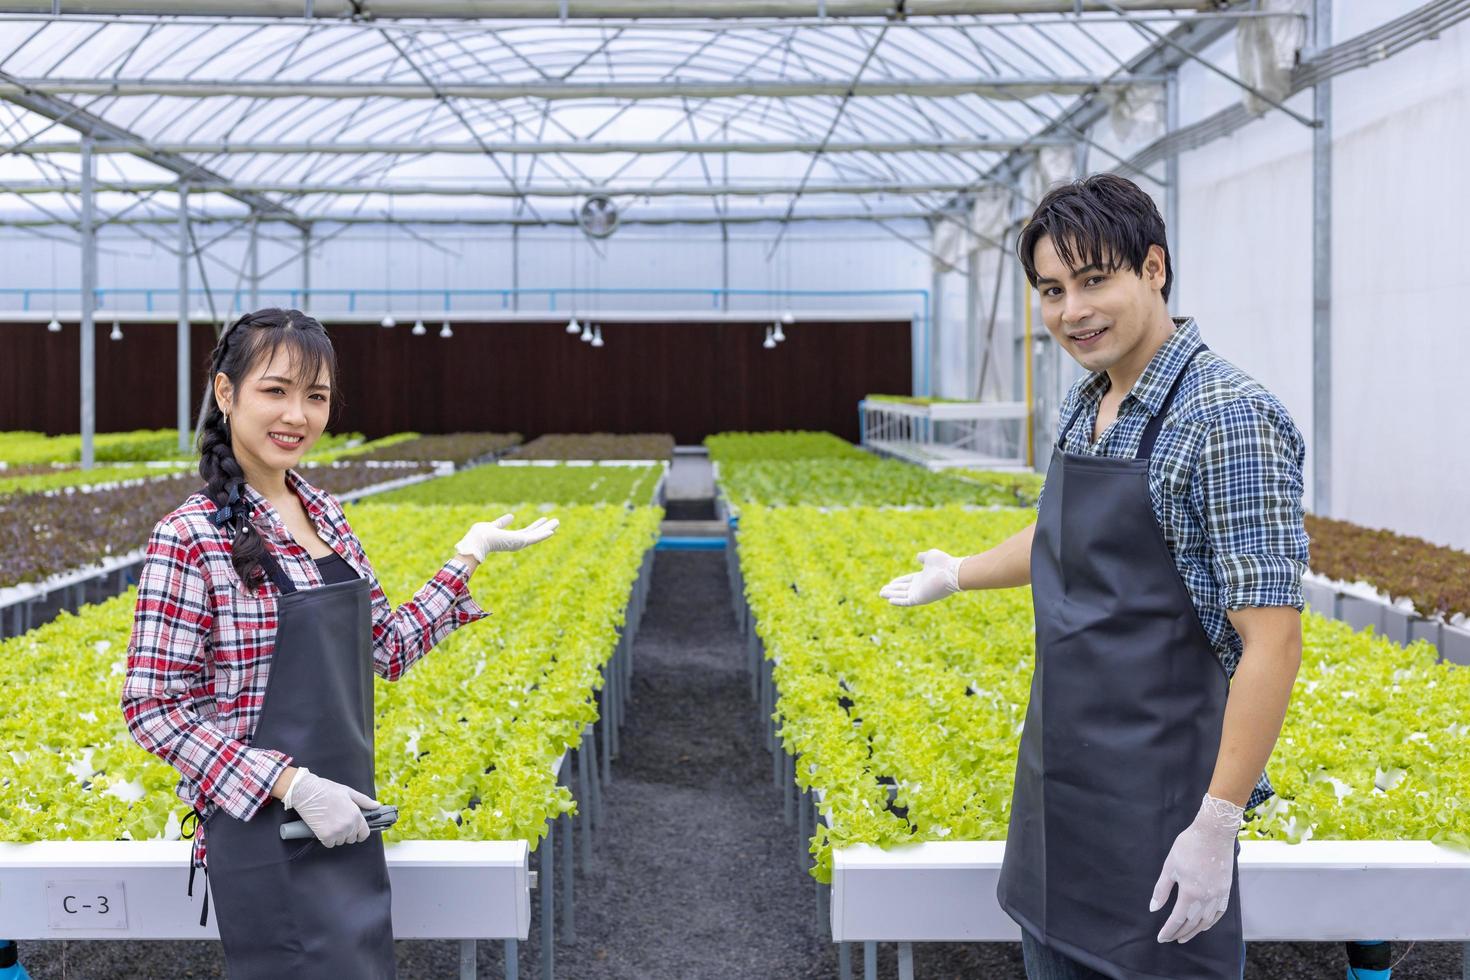 Team of Asian local farmer growing green oak salad lettuce in the greenhouse using hydroponics water system organic approach for family business and picking some for sale photo